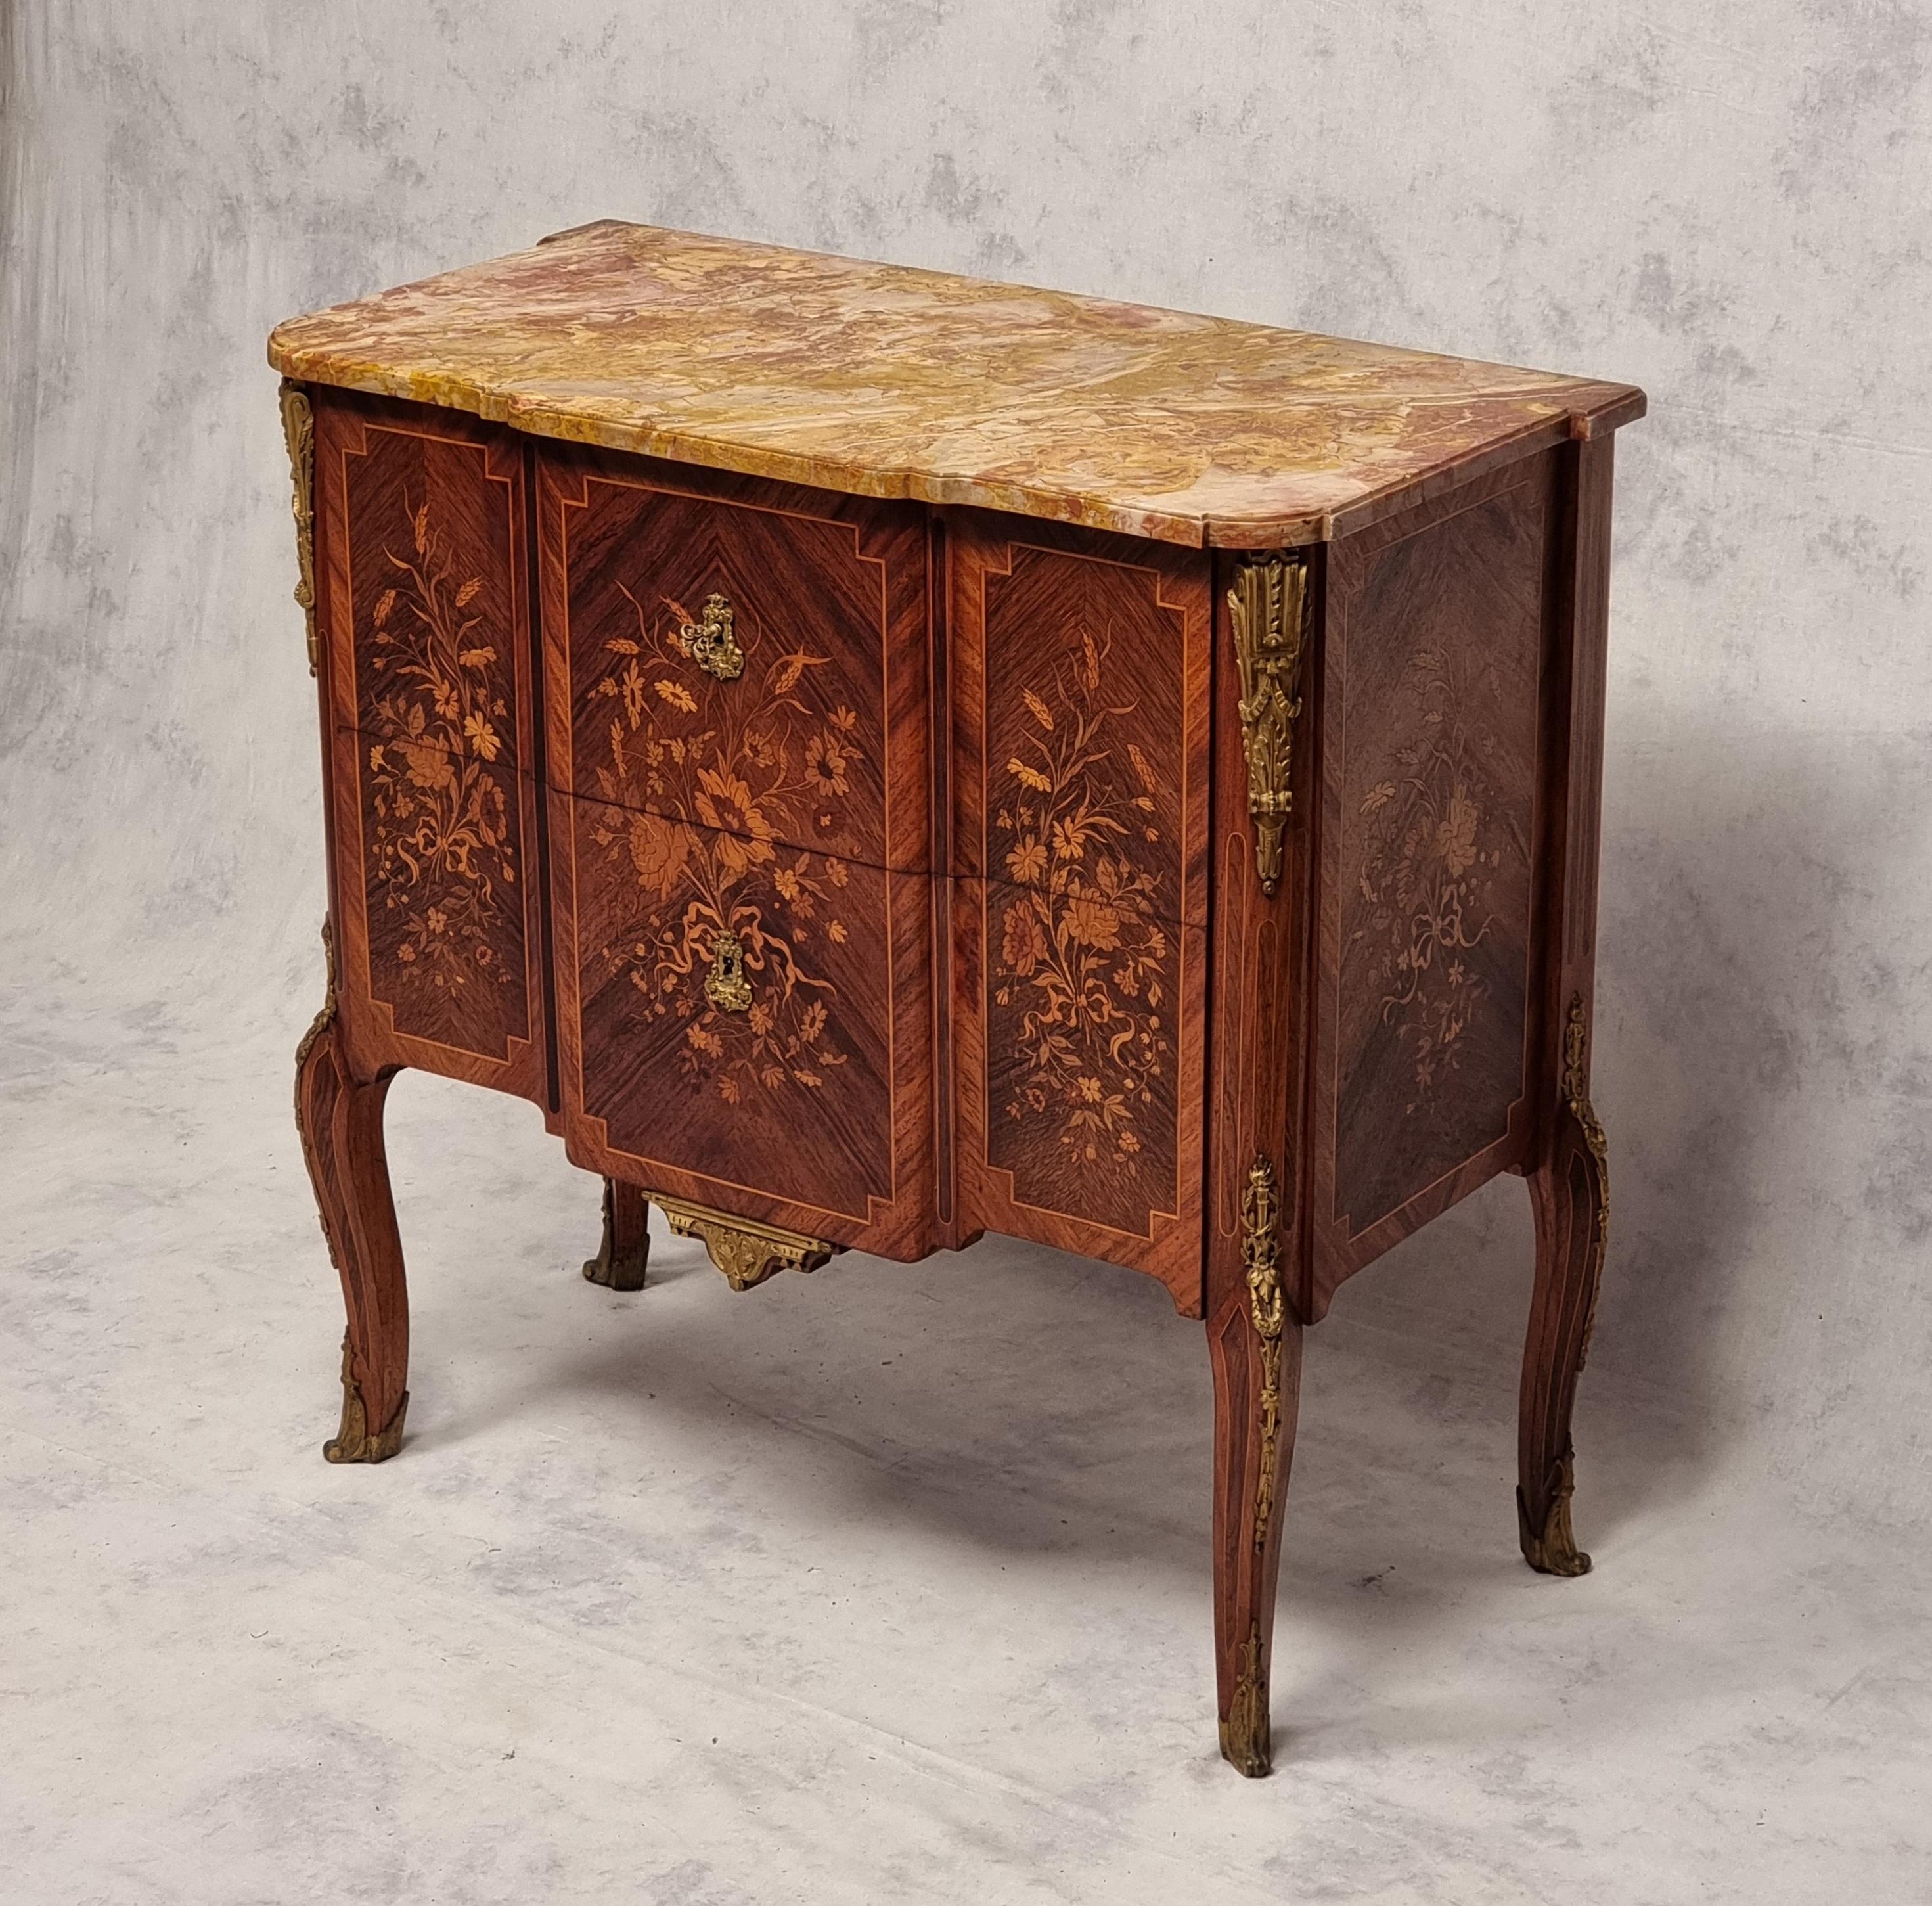 Superb Transition Louis XV, Louis XVI style chest of drawers in marquetry. This chest of drawers is from the Napoleon III period, late 19th century. It is worked in rosewood, rosewood and light wood in marquetry. Projection chest of drawers resting